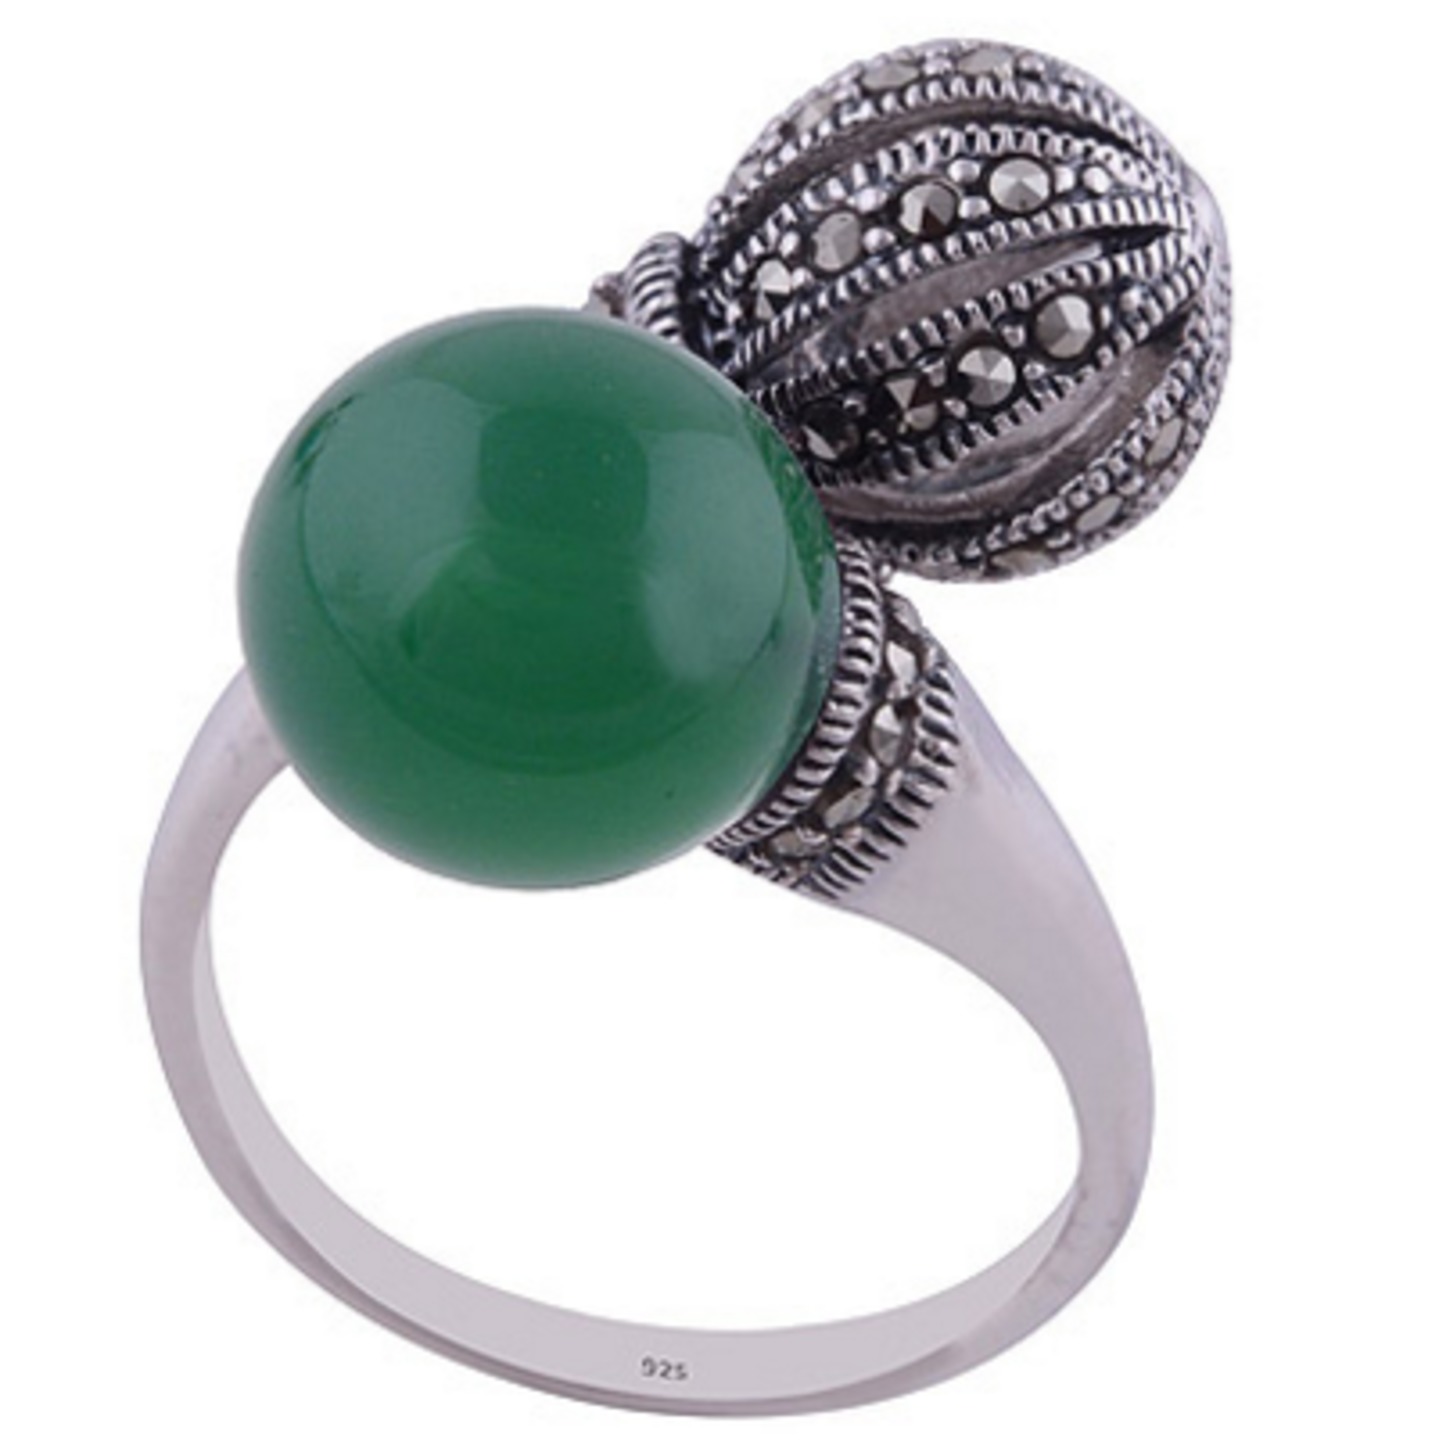 The Onyx n Marcasite Sphere Silver Ring